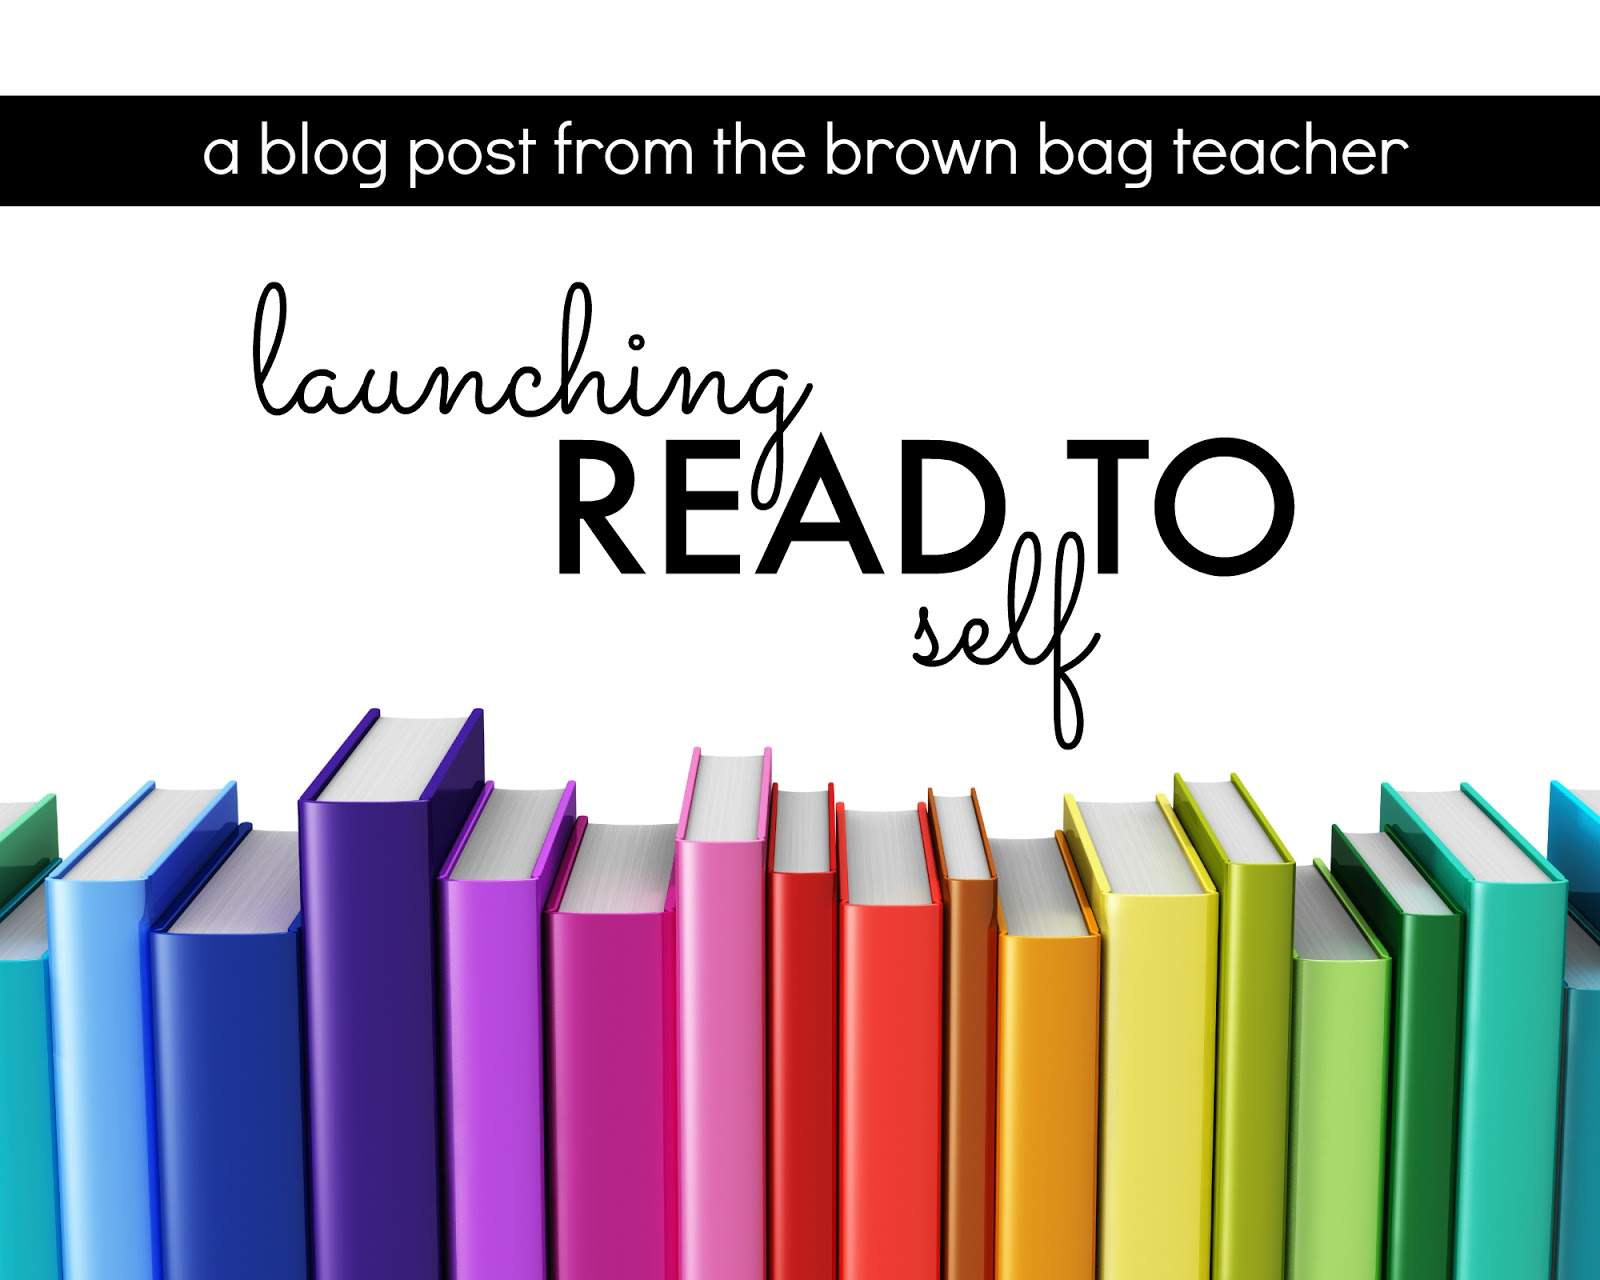 Launching Read To Self: Daily 5, Chapter 5 - The Brown Bag Teacher